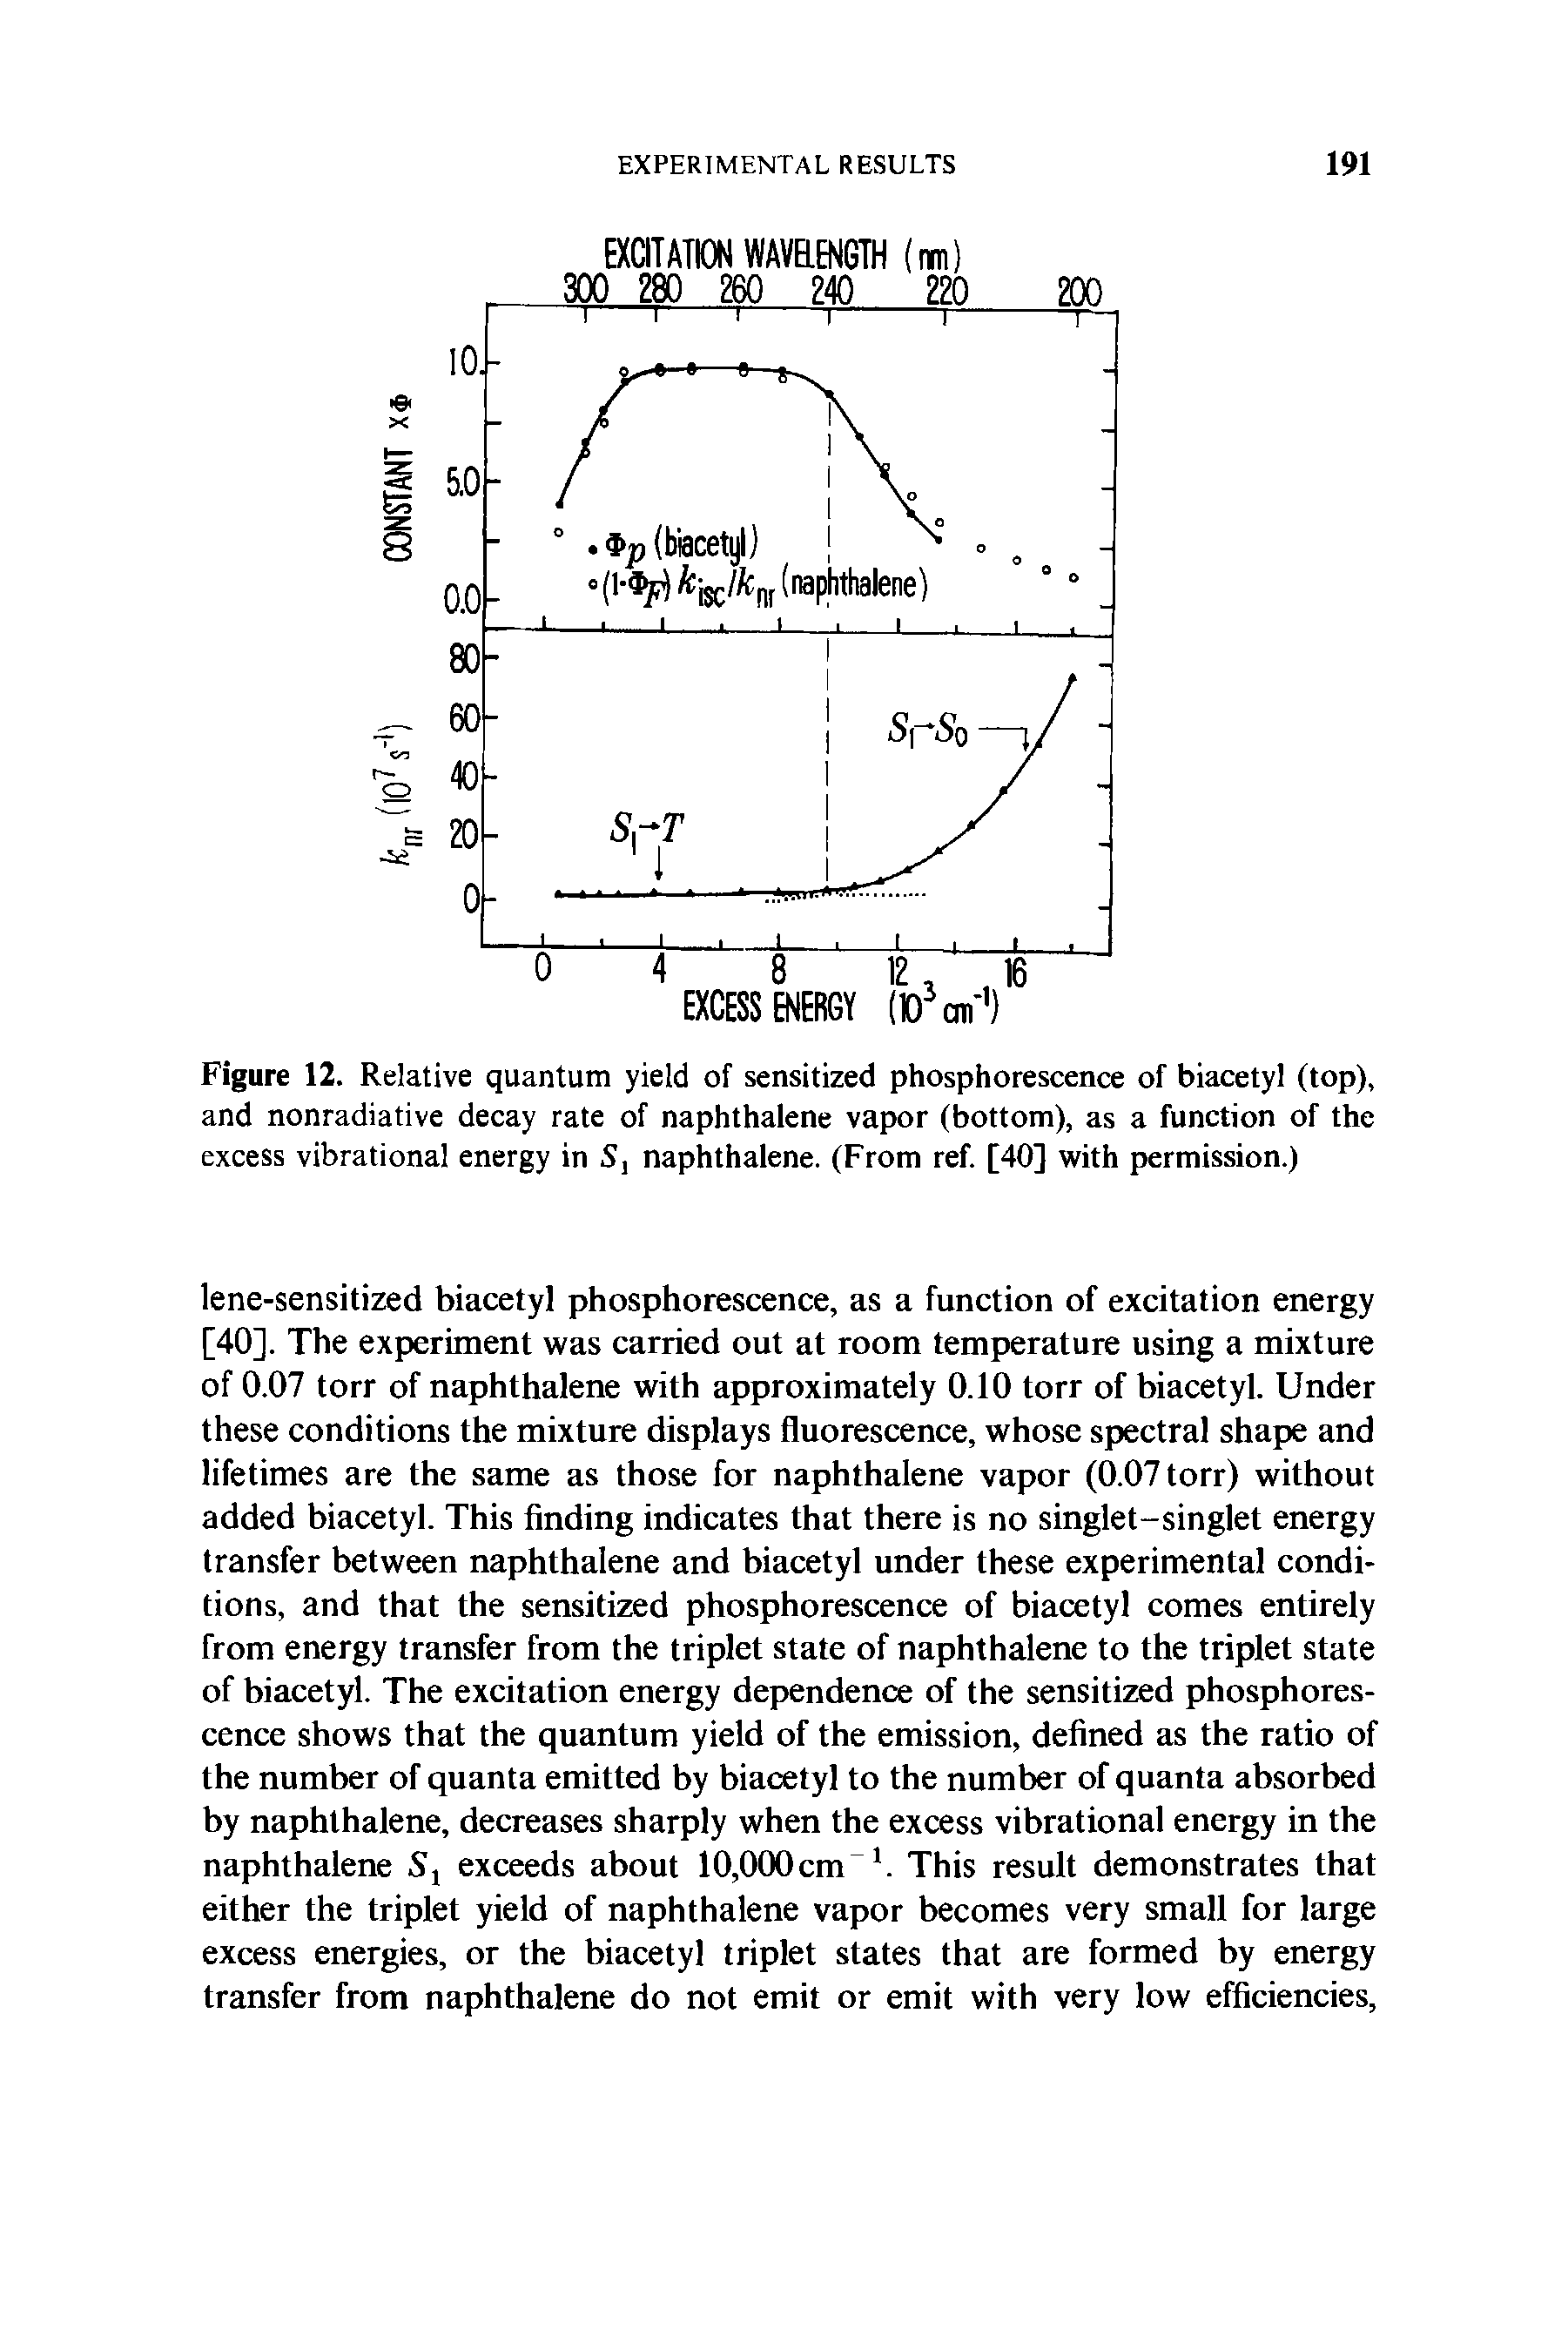 Figure 12. Relative quantum yield of sensitized phosphorescence of biacetyl (top), and nonradiative decay rate of naphthalene vapor (bottom), as a function of the excess vibrational energy in Sl naphthalene. (From ref. [40] with permission.)...